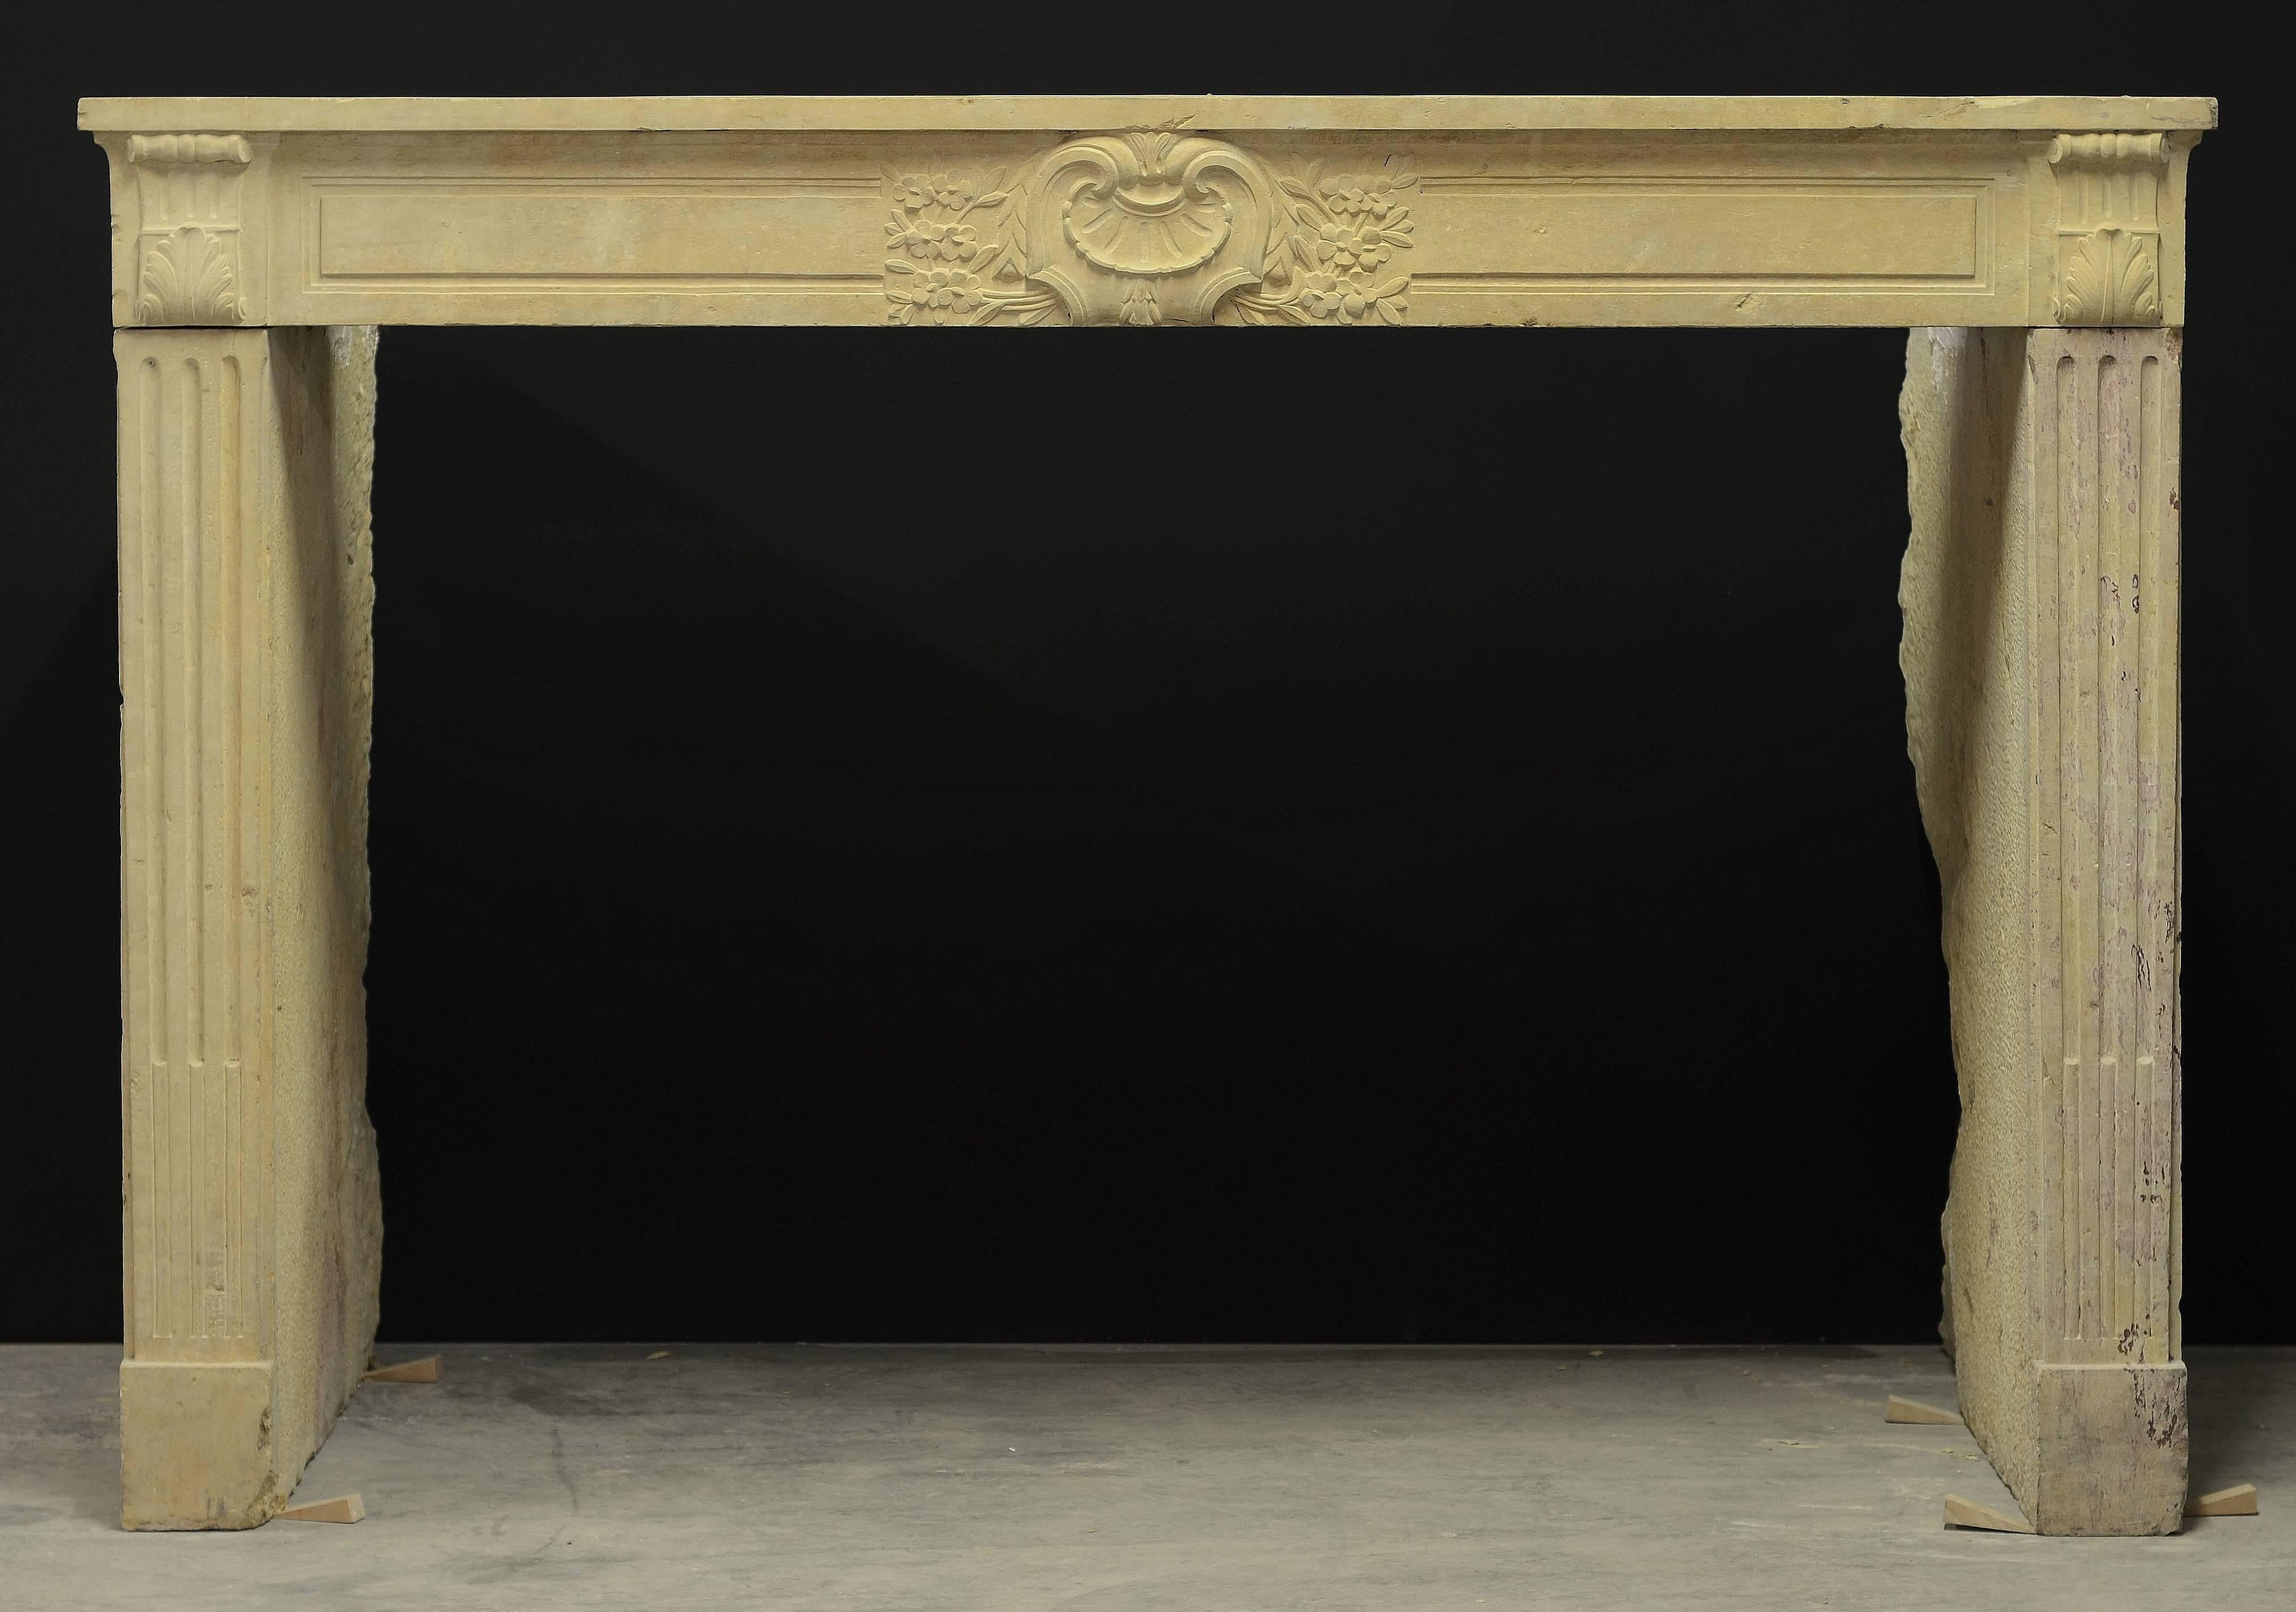 Solid 19th century Louis XVI limestone fireplace.

Comes with deep returns.
Opening measurements: 38.2 x 54.7 inch (height x width).